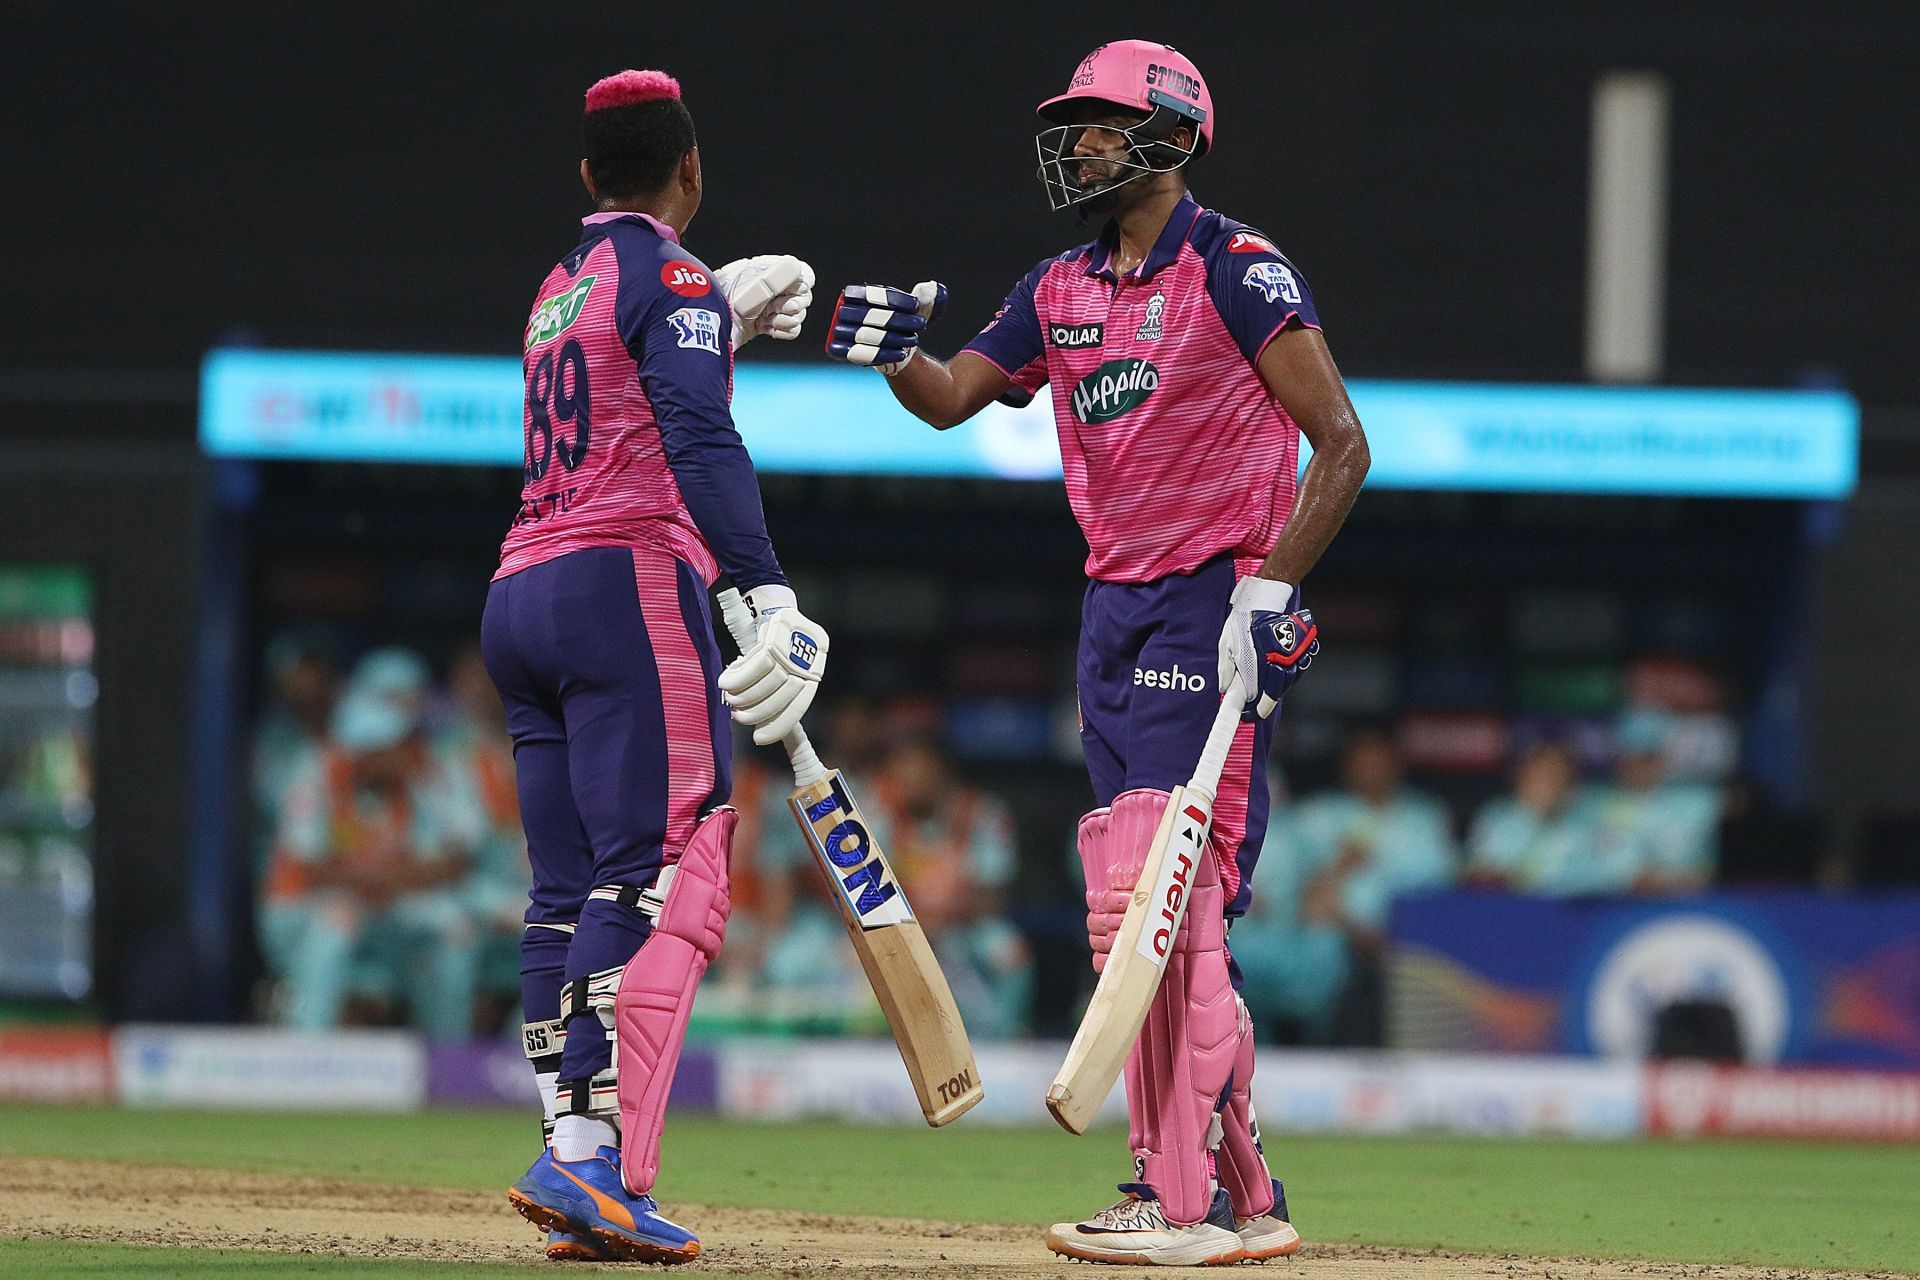 Sanju Samson shed light on why Ravichandran Ashwin was retired out in the penultimate over of the Rajasthan innings (Image: Twitter/IPL)